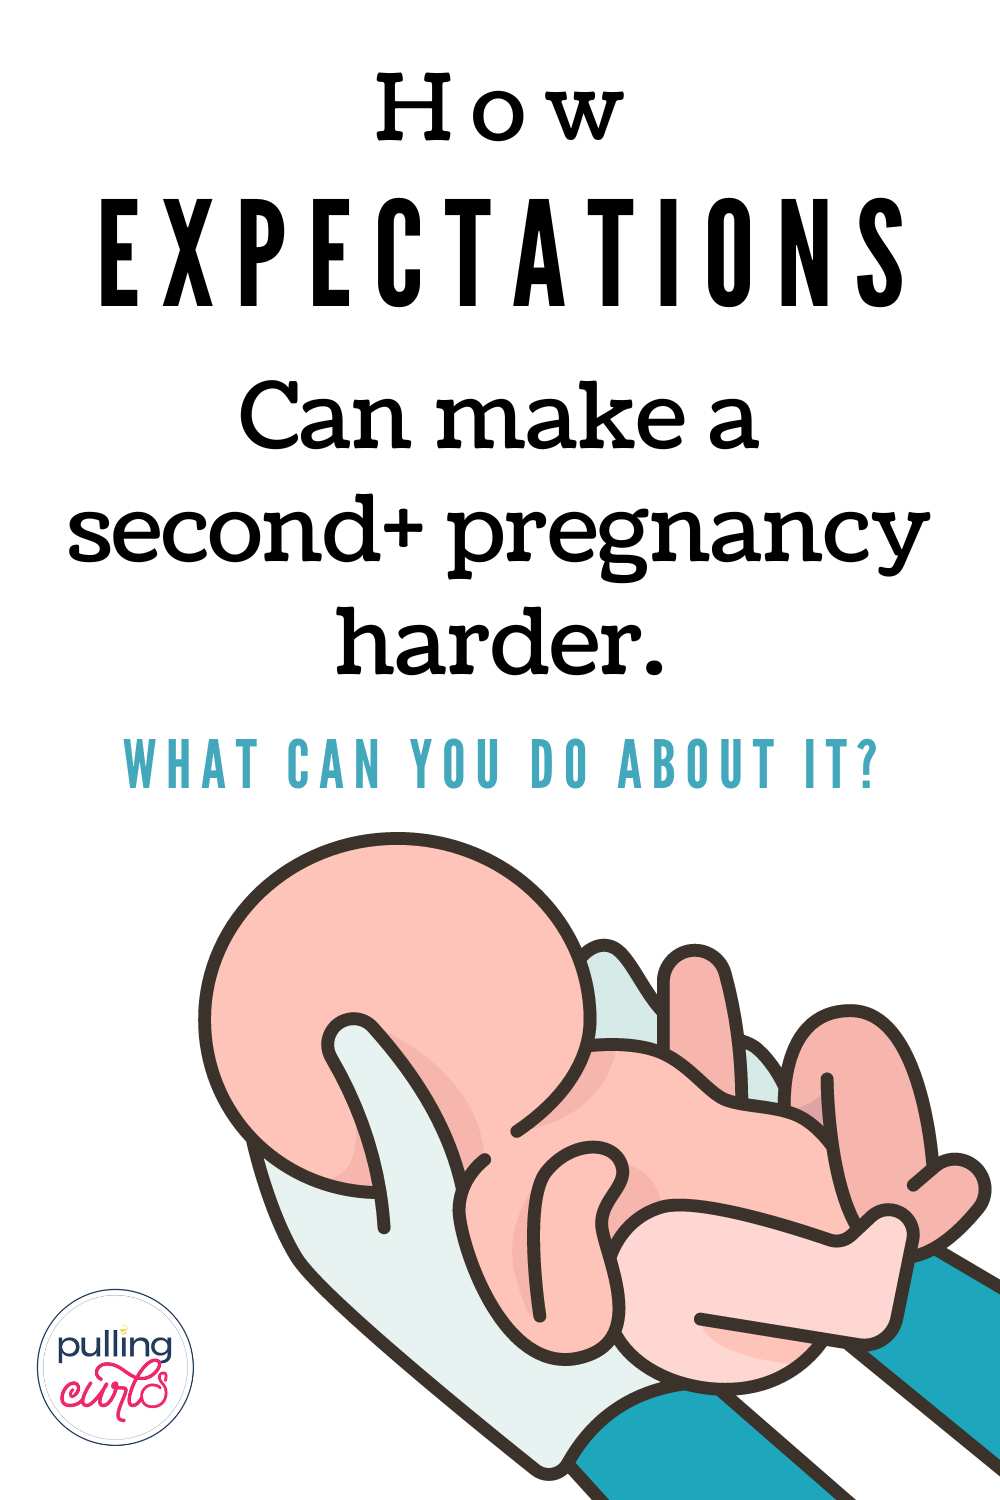 doctor delivering faceless baby / how expectations can make second+ pregnancy harder / what can you do about it? via @pullingcurls